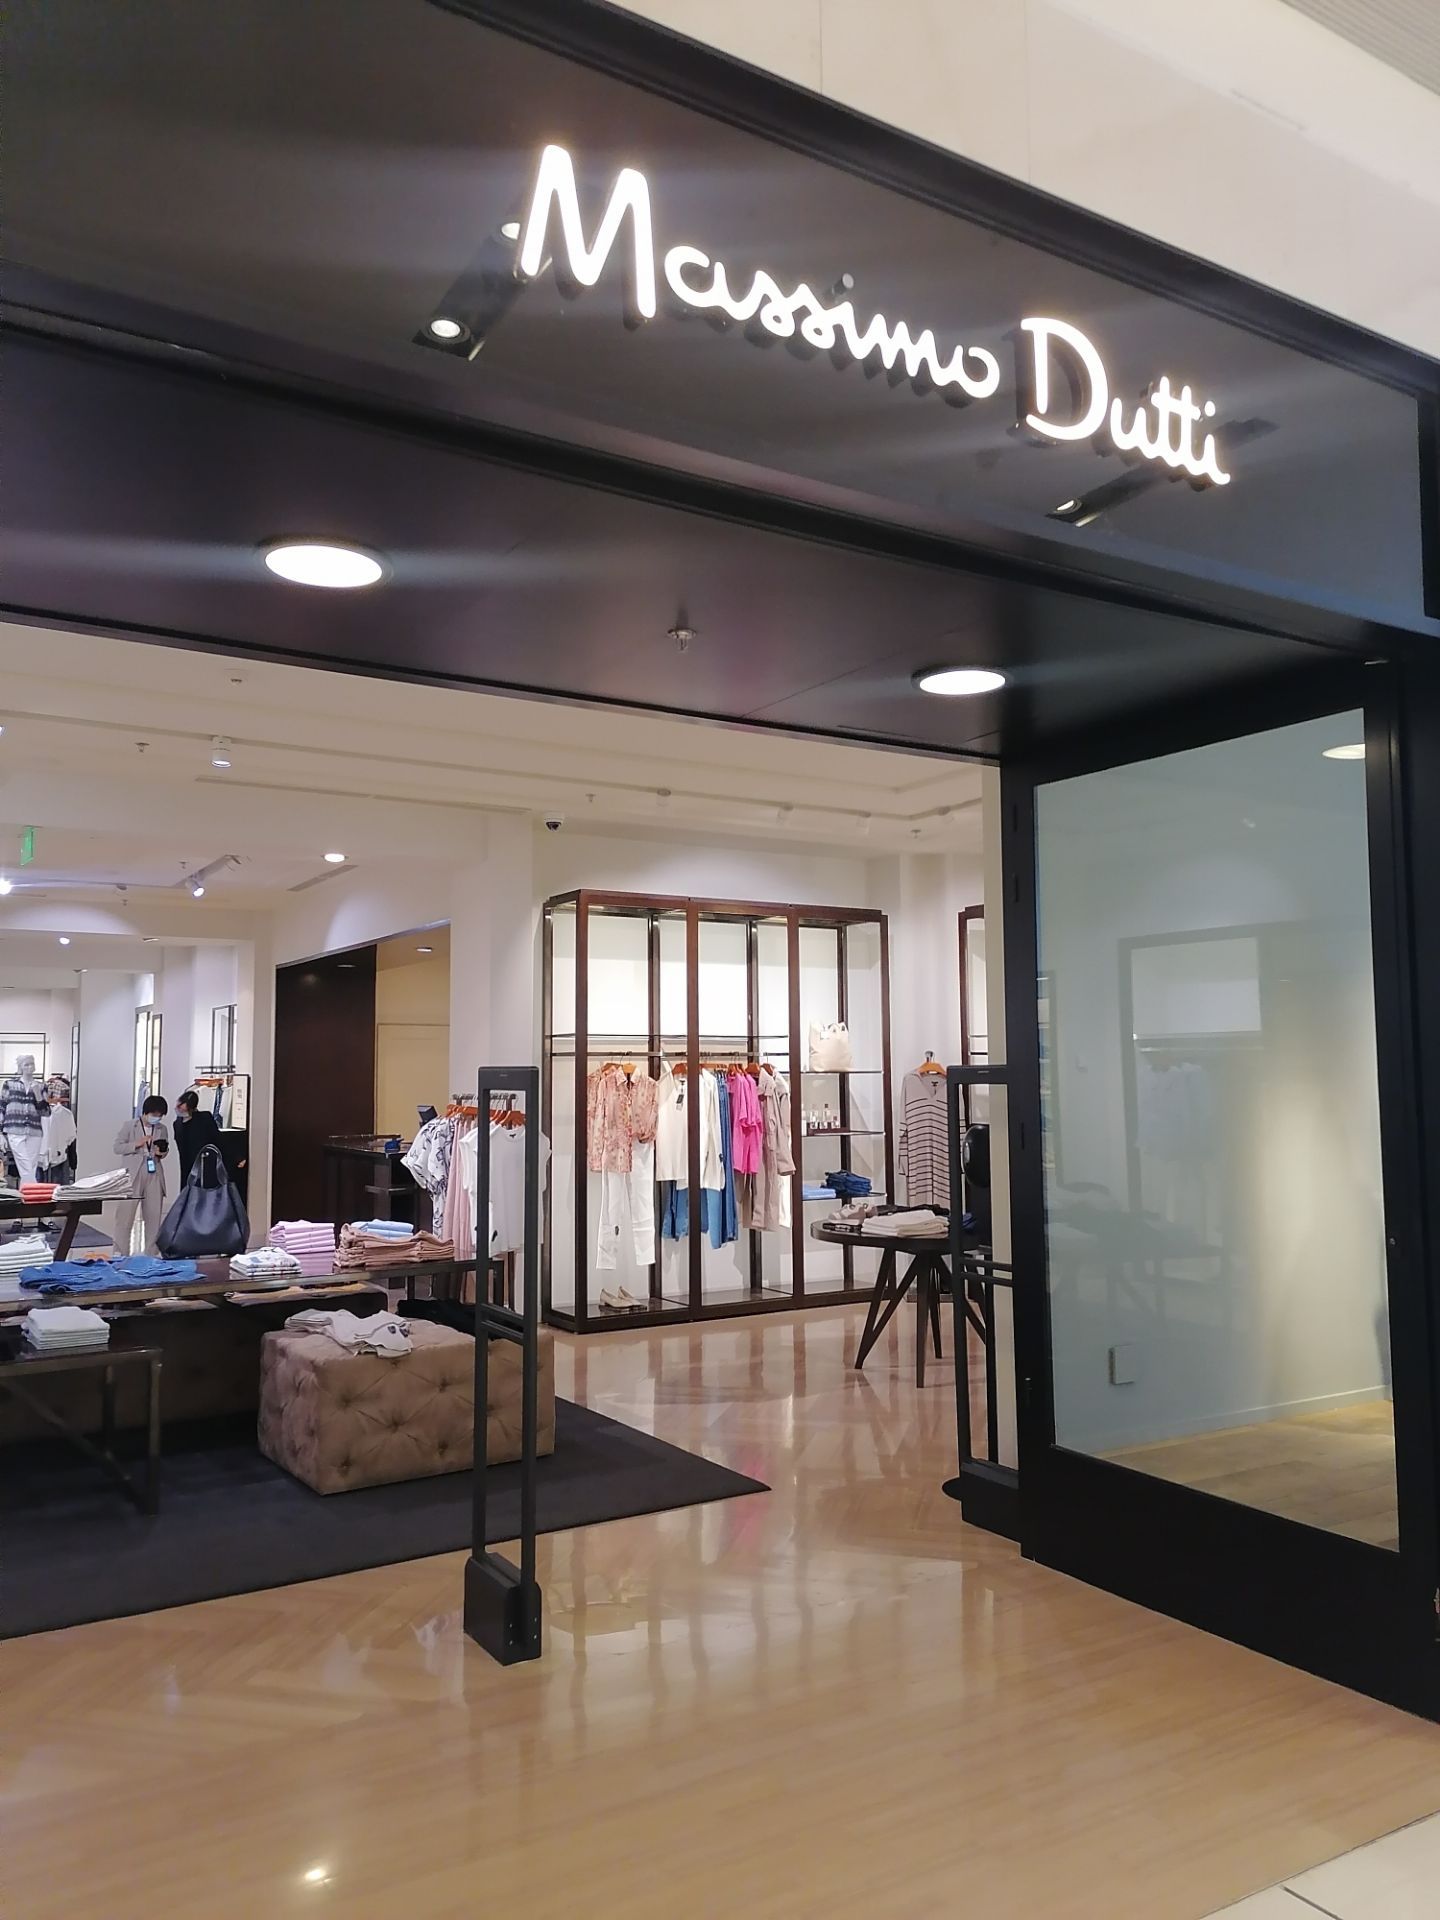 Massimo Dutti(愛琴海購物公園店) travel guidebook –must visit attractions in  Chongqing – Massimo Dutti(愛琴海購物公園店) nearby recommendation – Trip.com